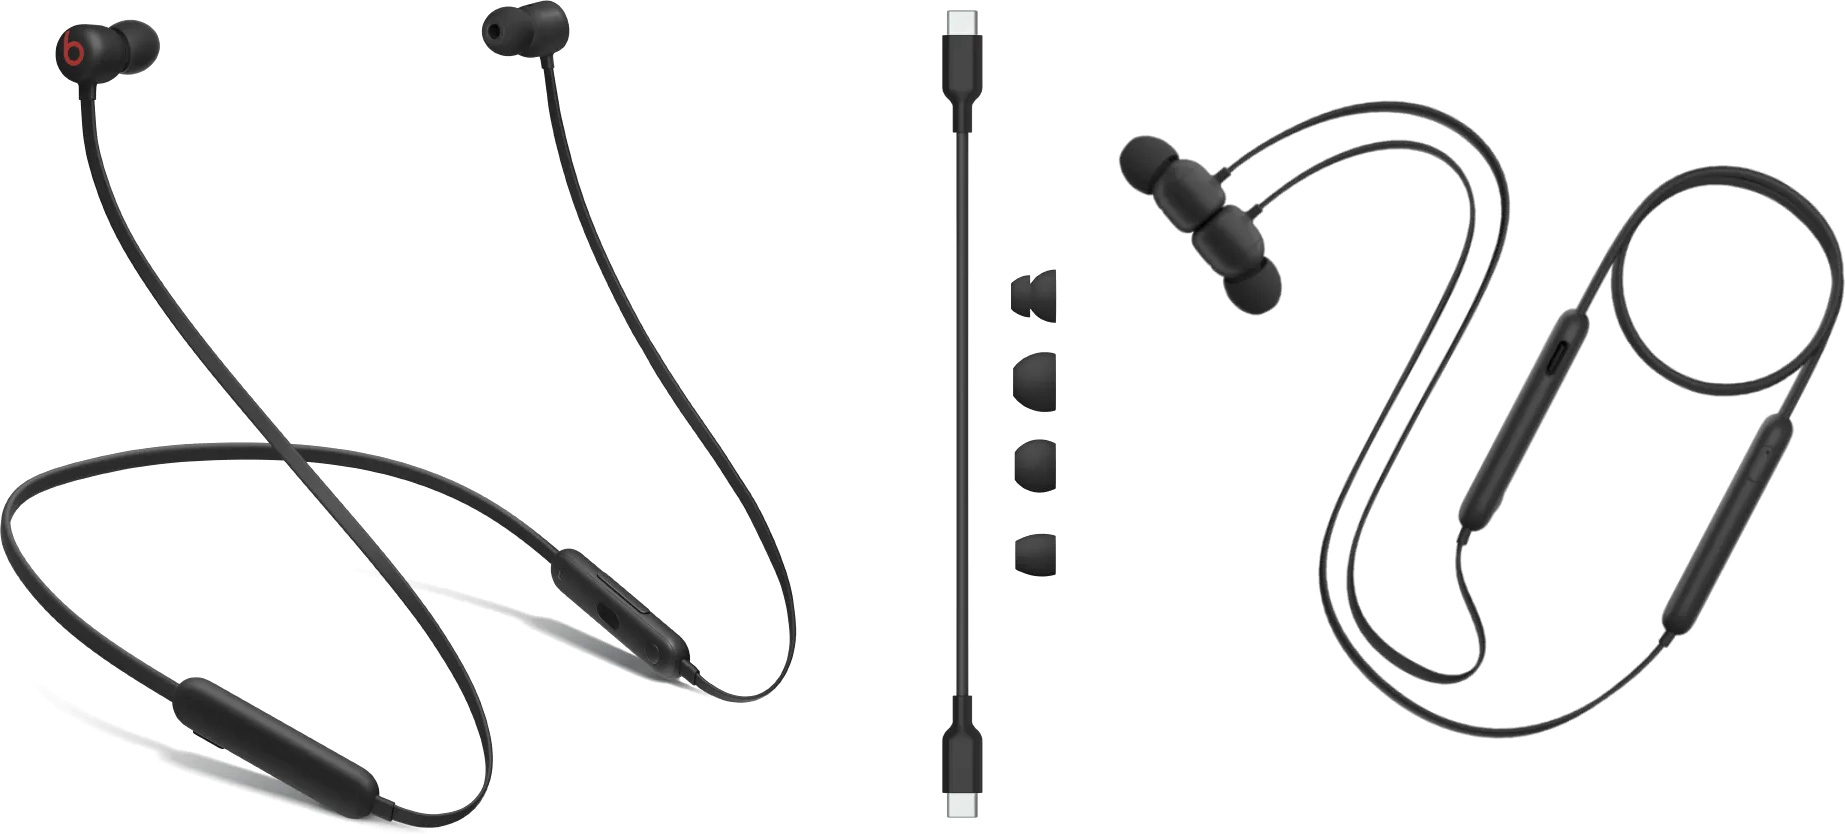 beatsx compatible with android